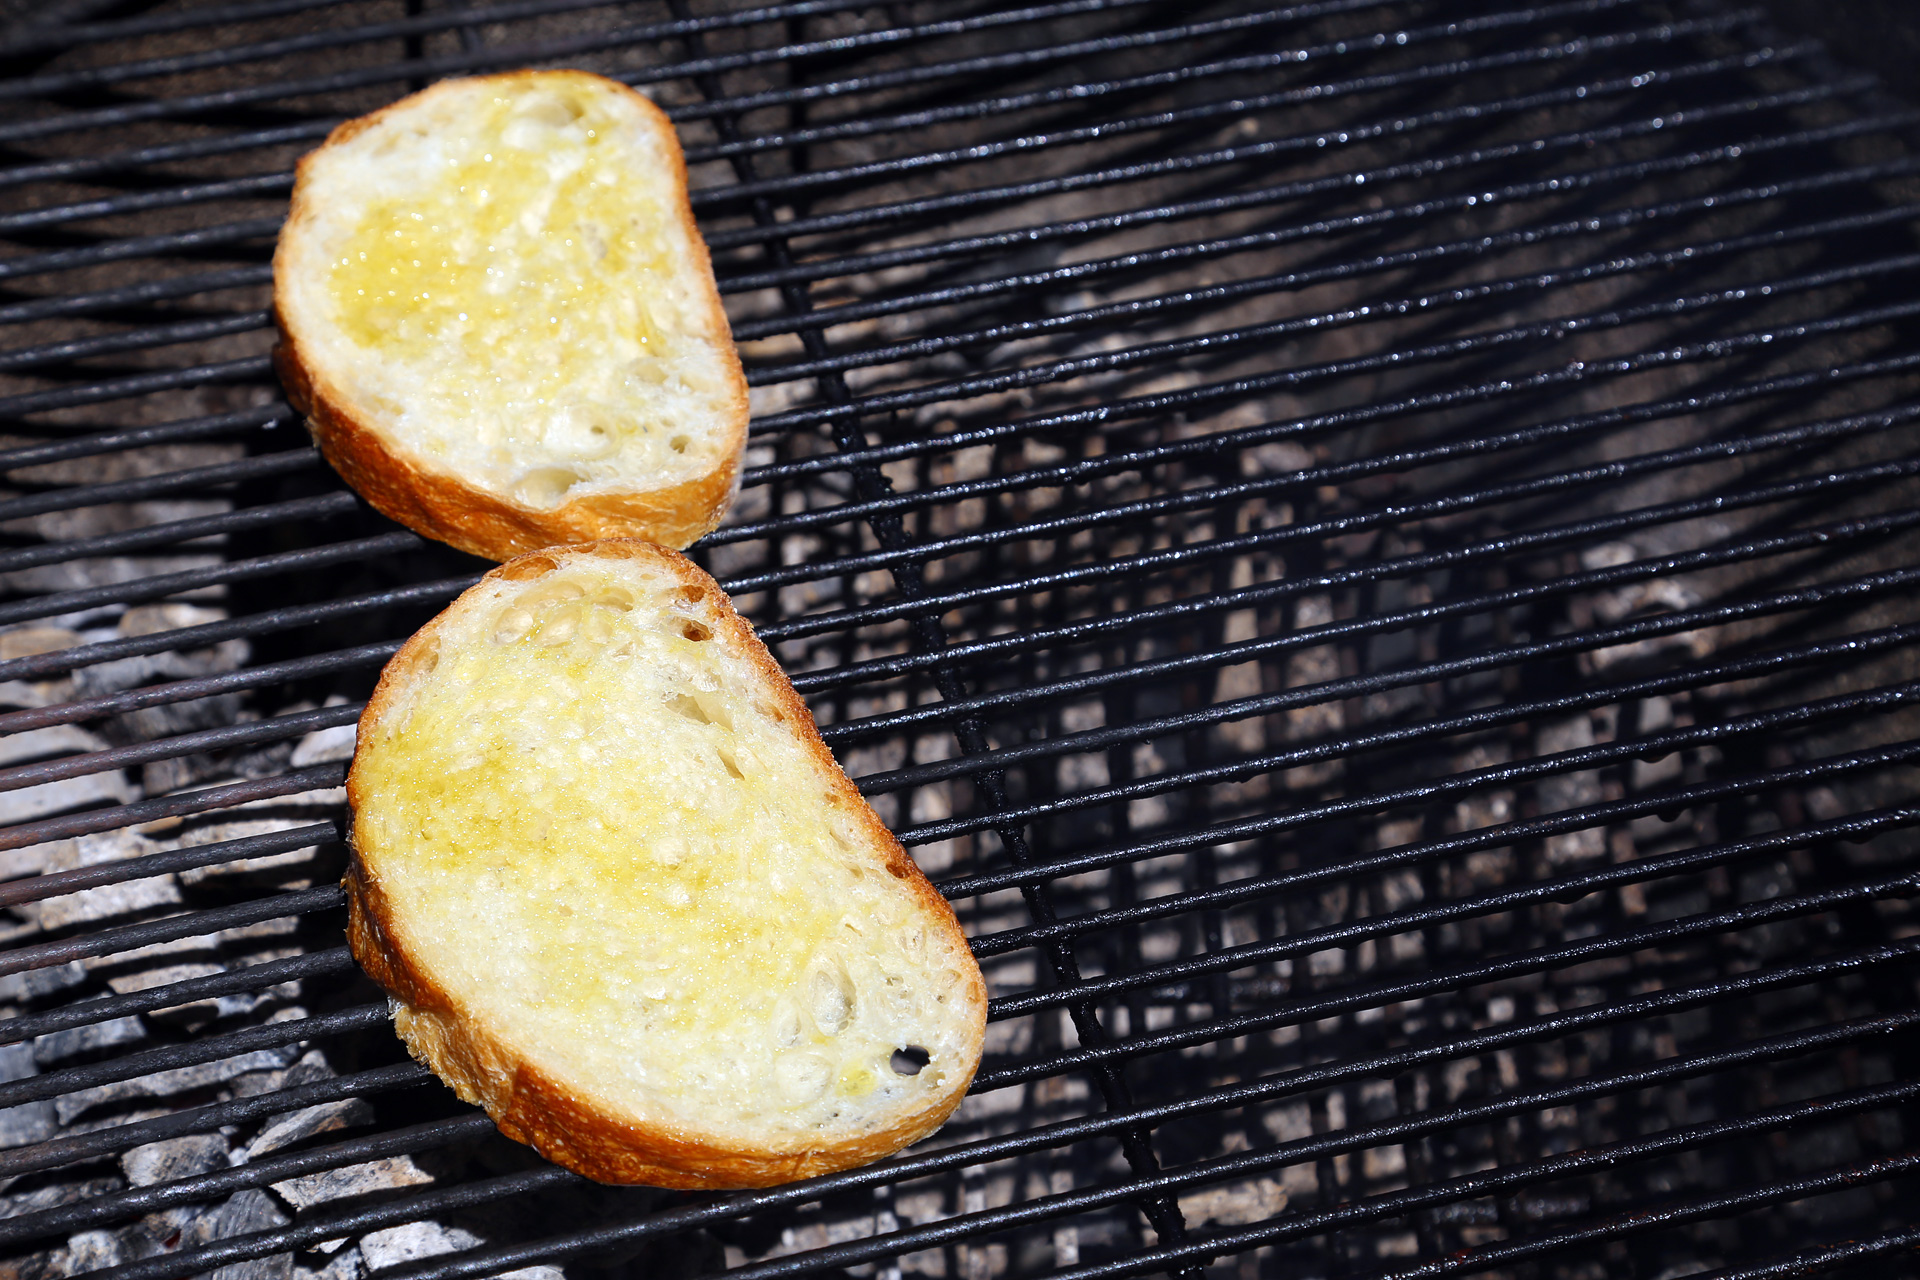 Brush both sides of each bread slice with a little olive oil then place over the fire, turning once, until the bread is toasted and nicely grill-marked.